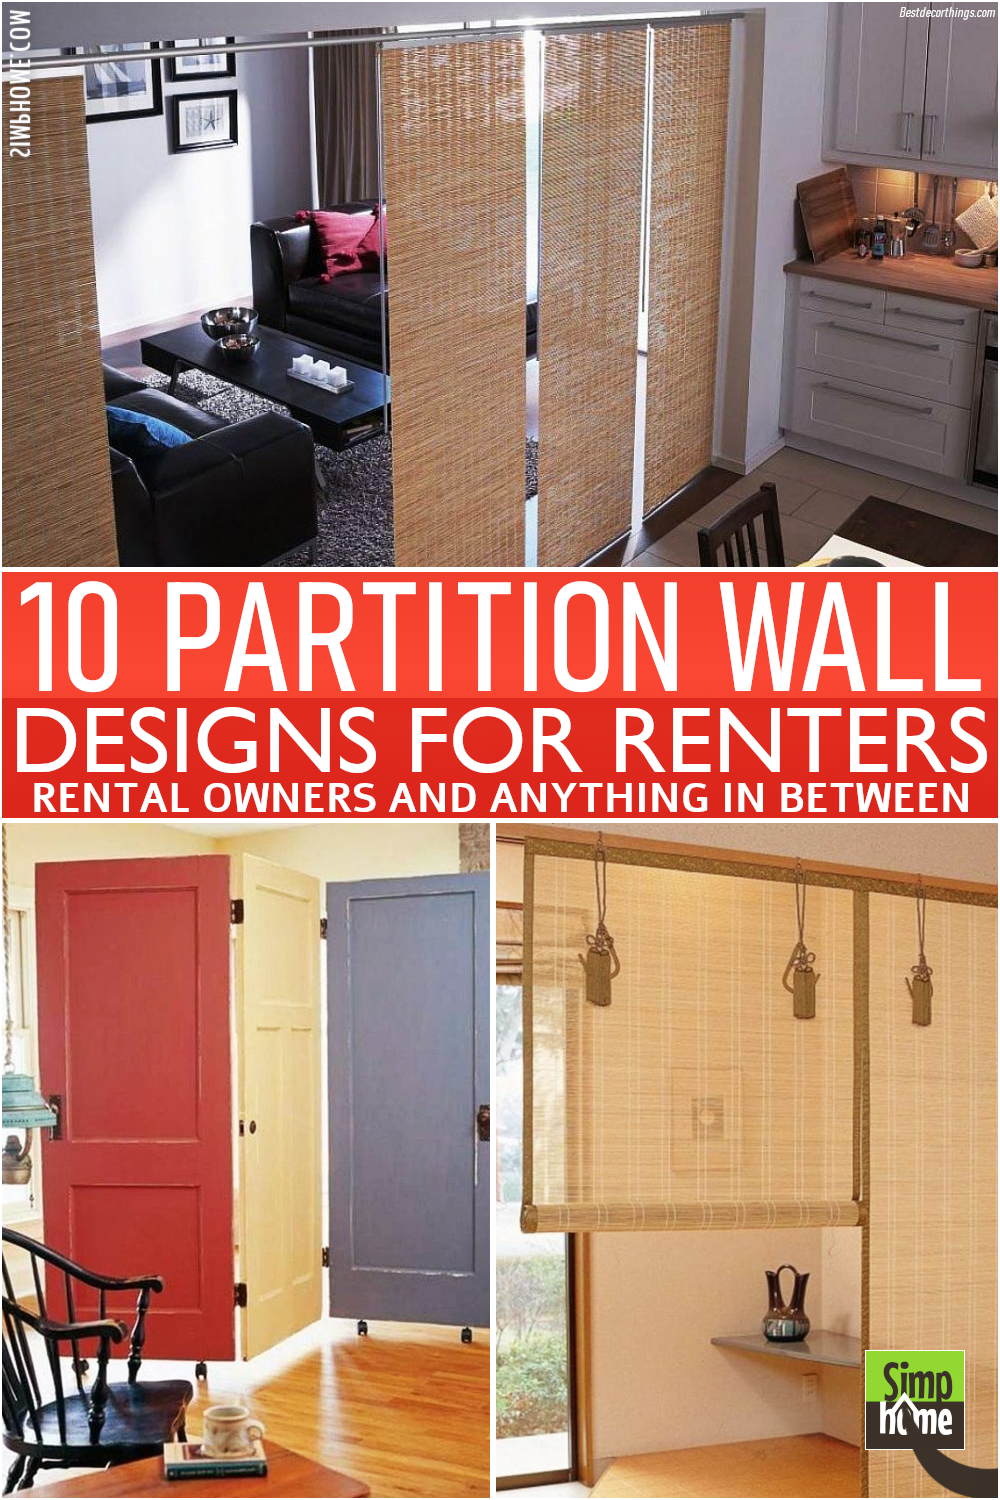 10 Partition Wall Designs for Renters For Cheap from Simphome